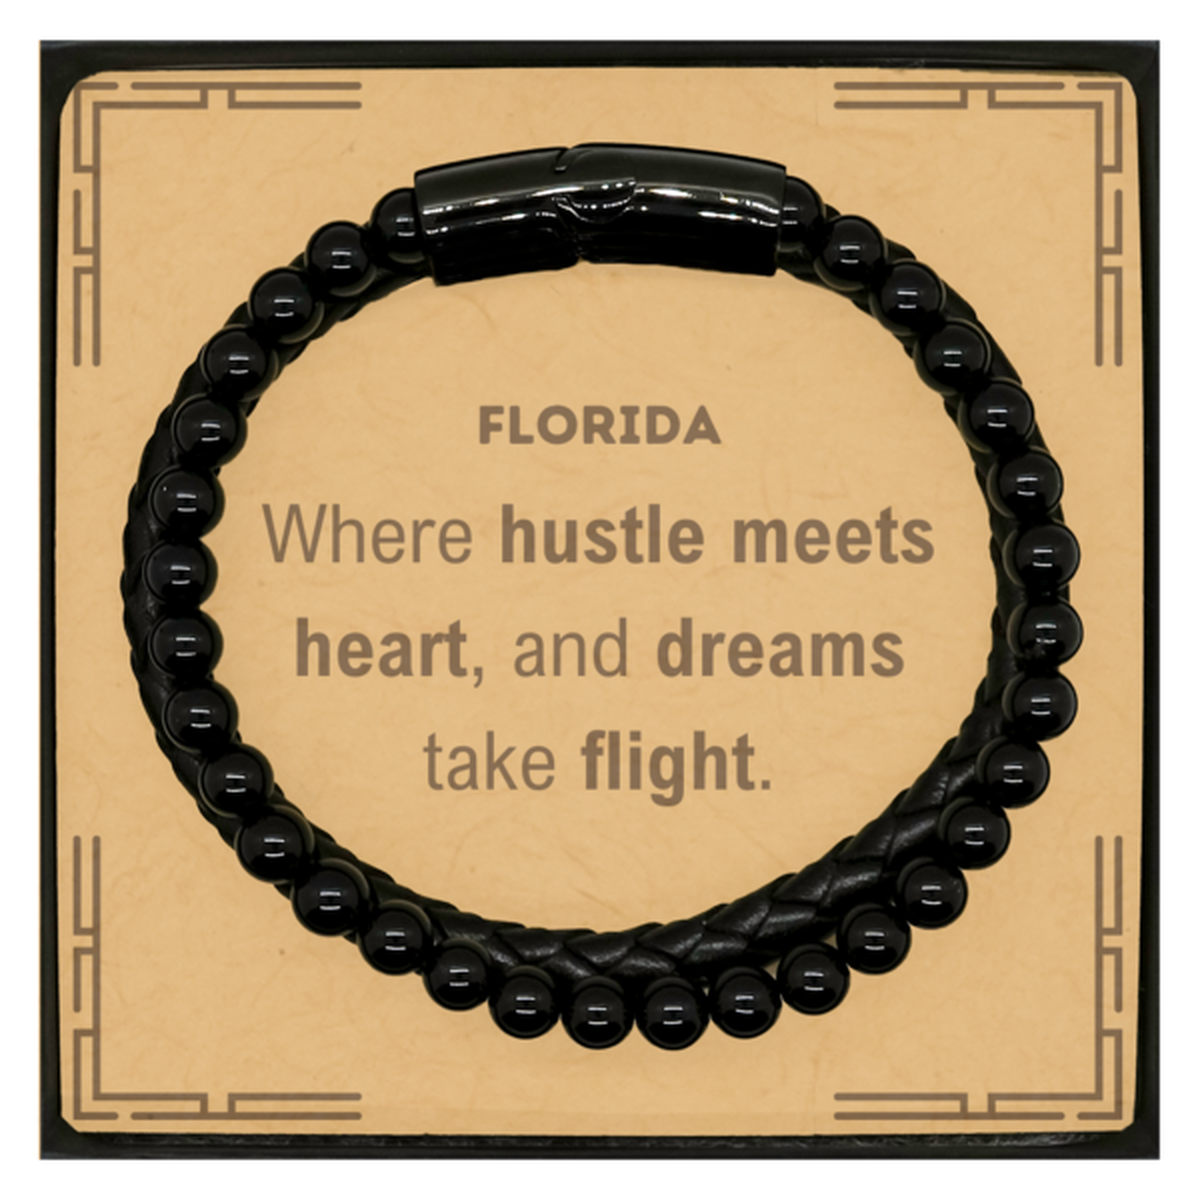 Florida: Where hustle meets heart, and dreams take flight, Florida Card Gifts, Proud Florida Christmas Birthday Florida Stone Leather Bracelets, Florida State People, Men, Women, Friends